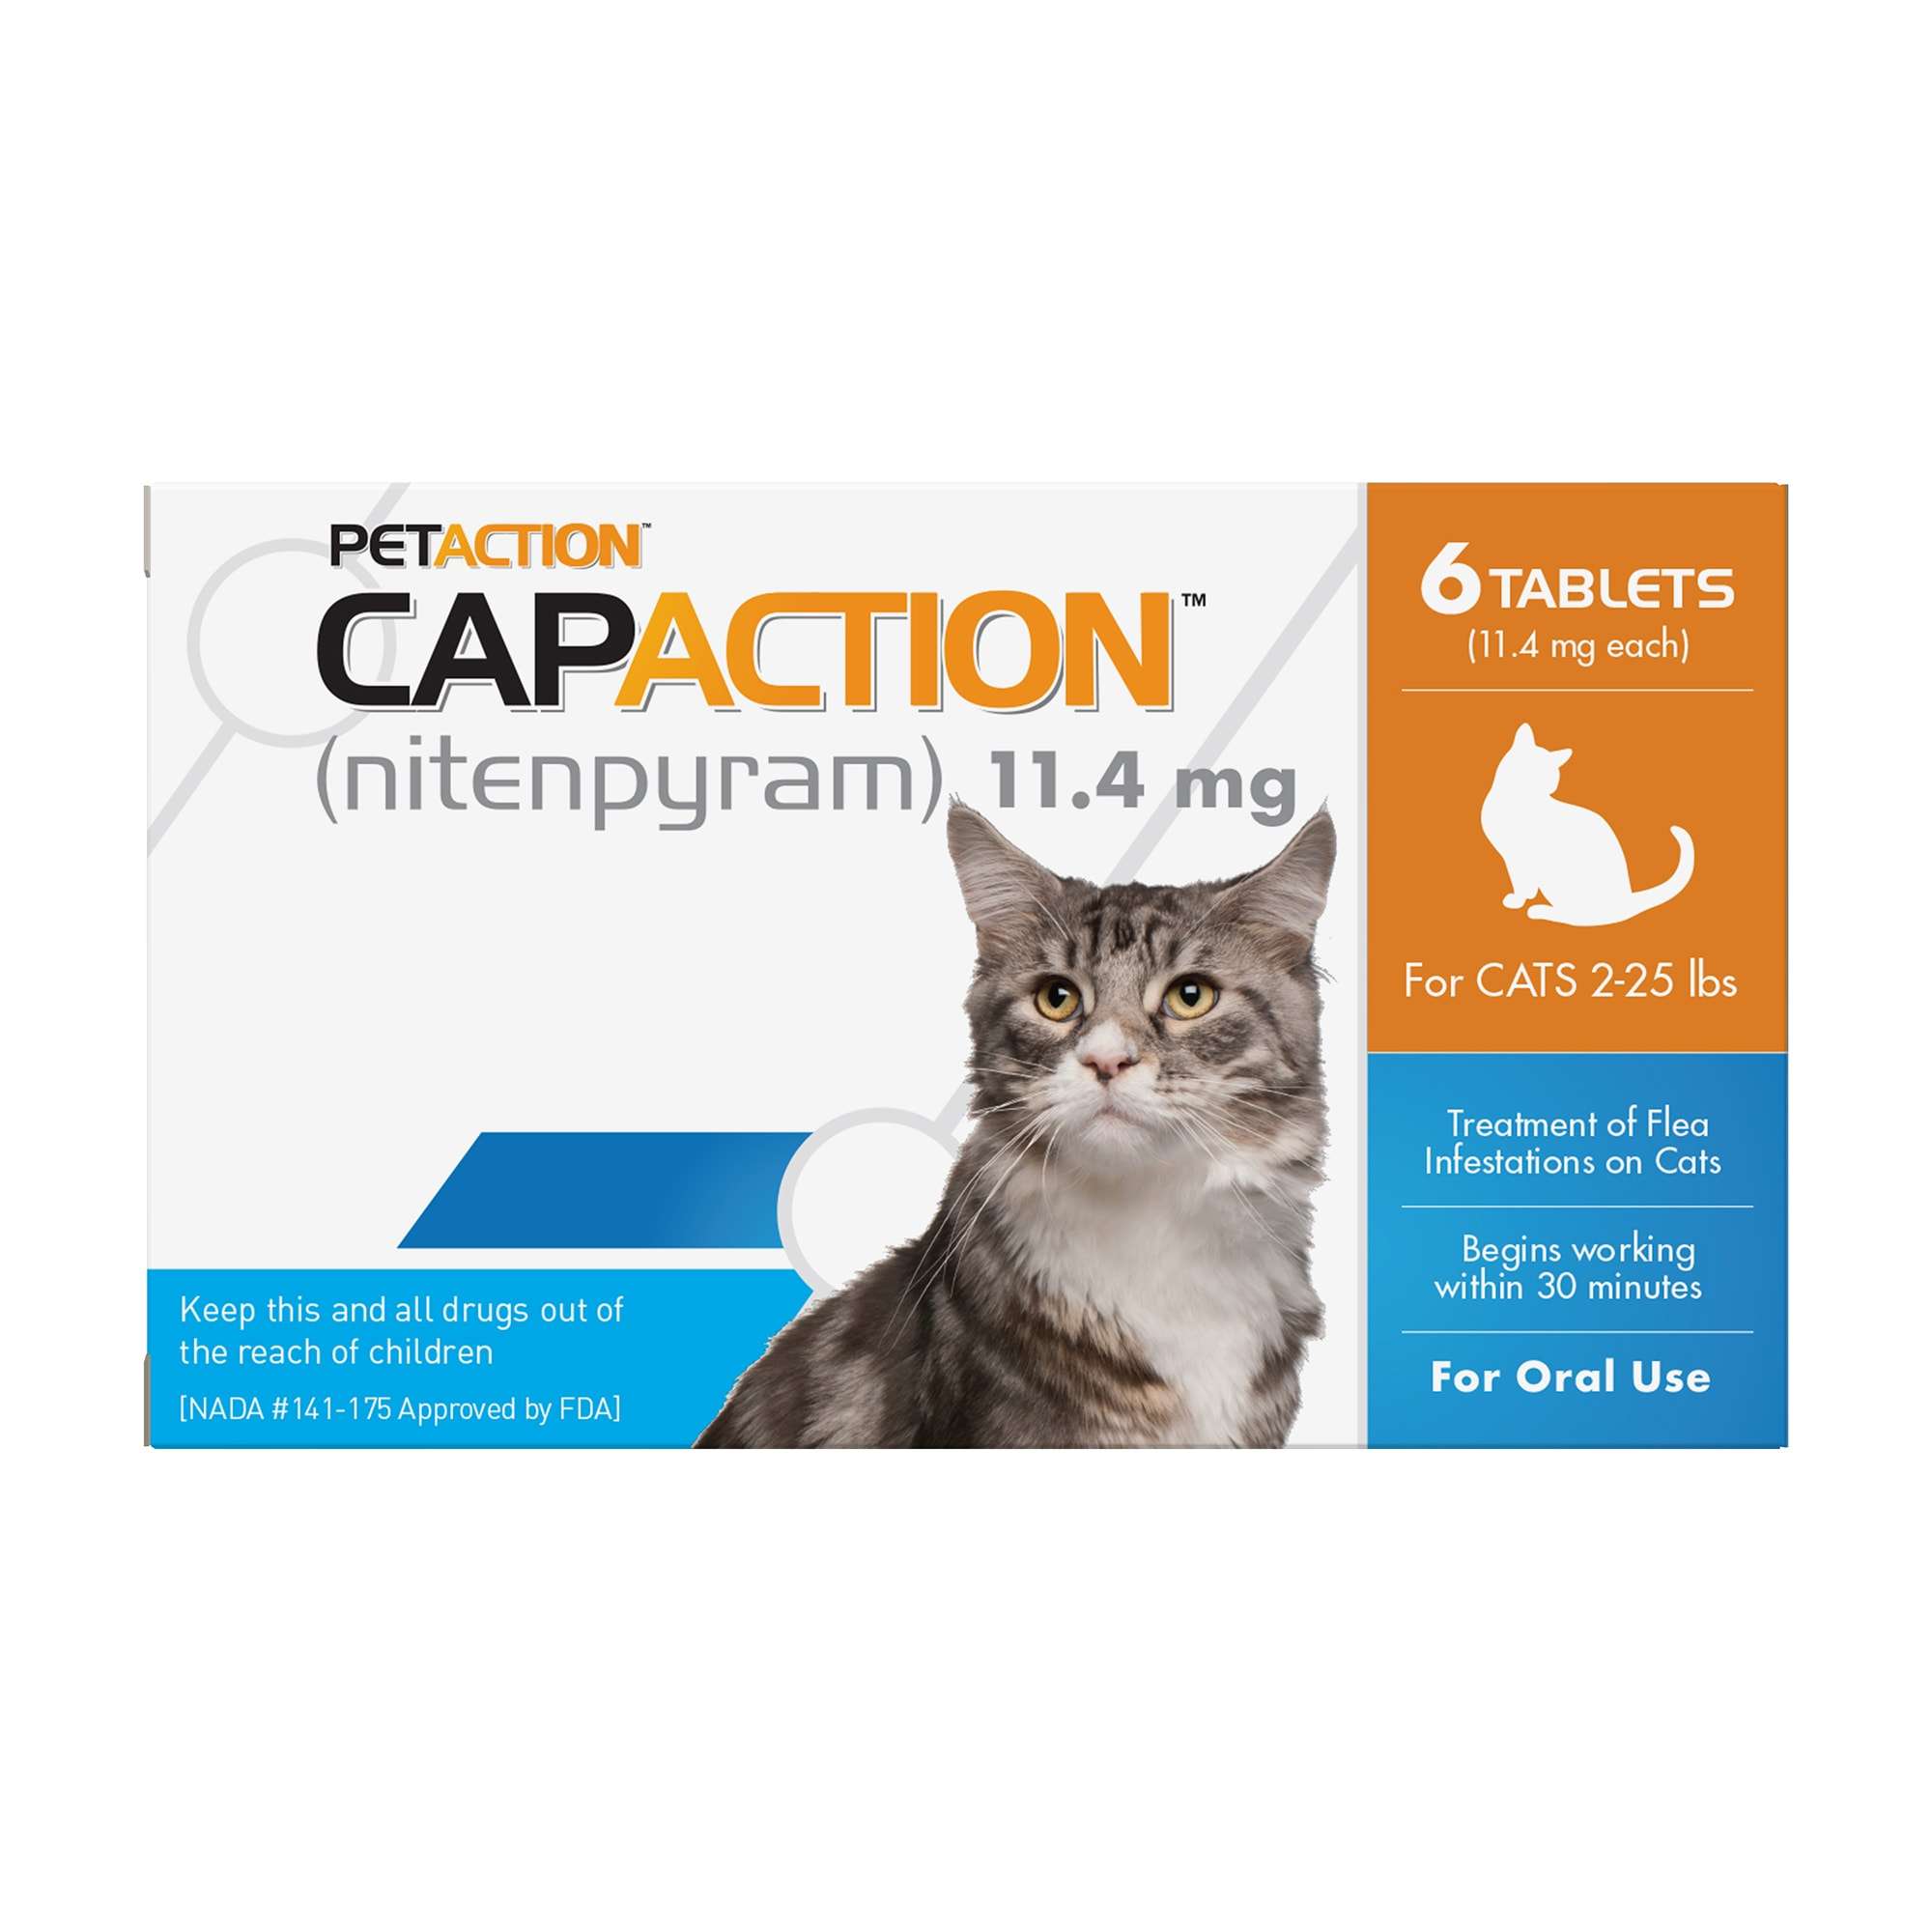 CapAction Fast Acting Oral Flea Treatment for Cats, Count of 6